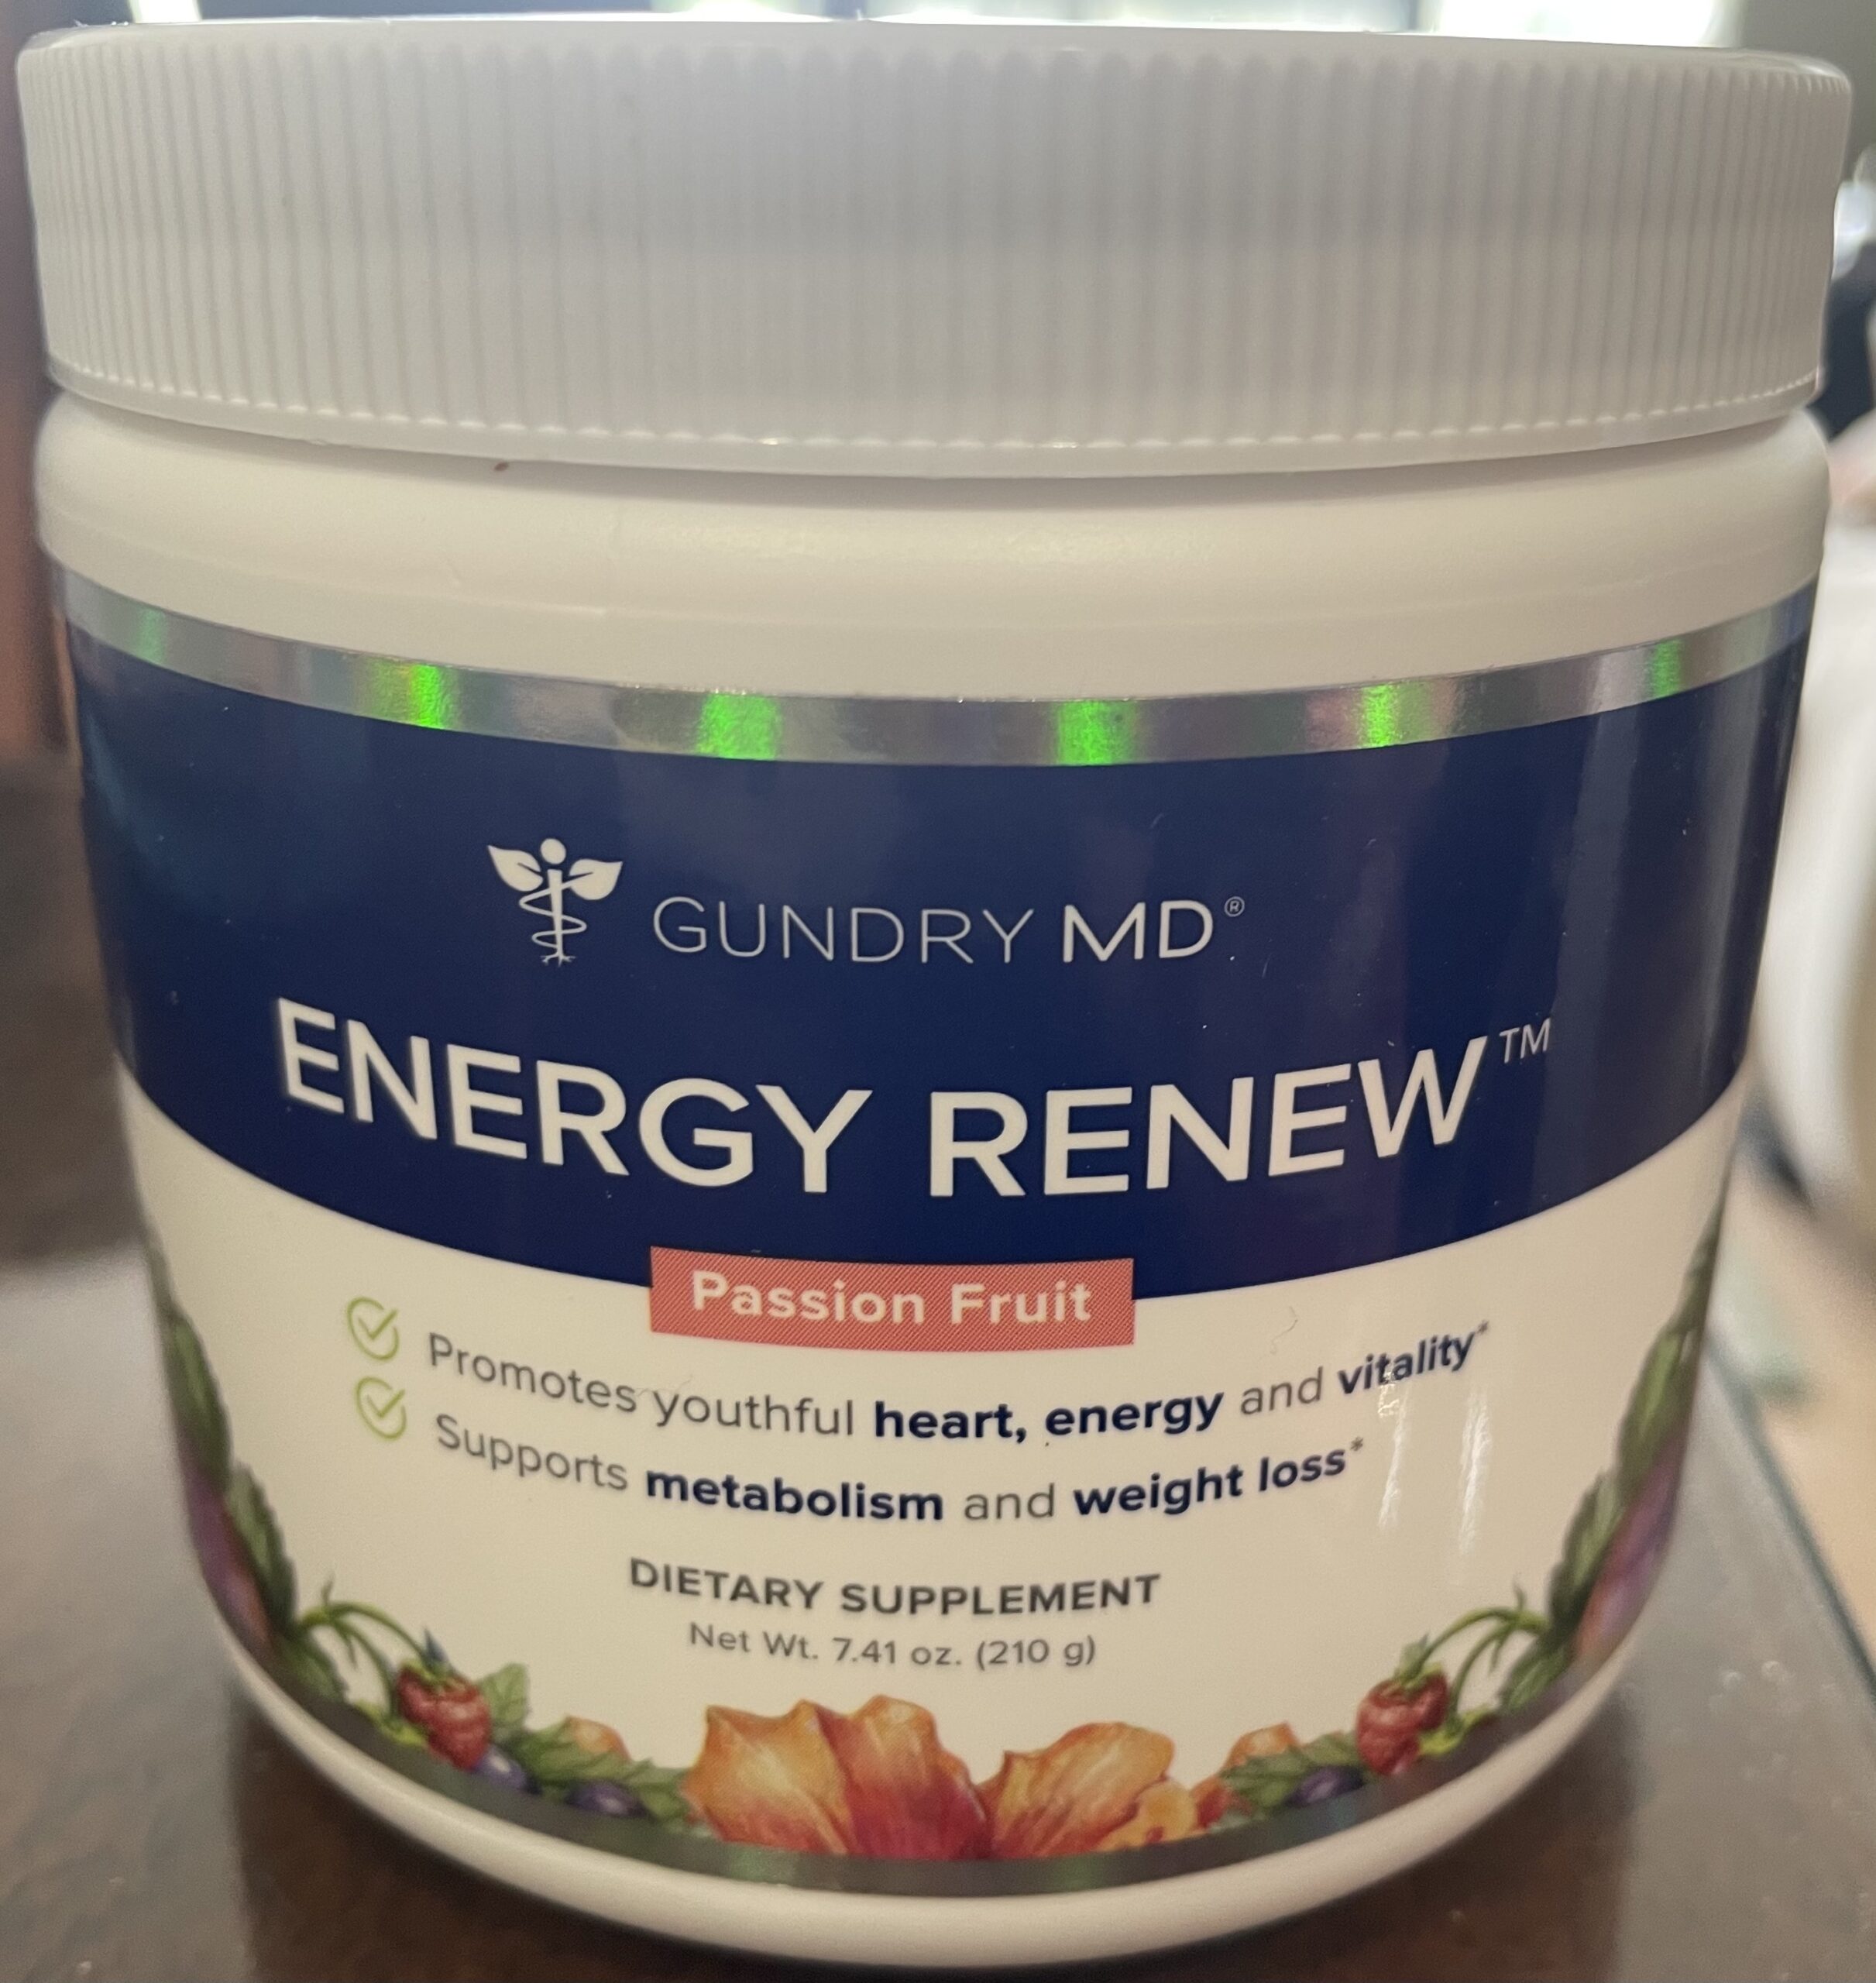 Gundry MD Energy Renew: Personal Review